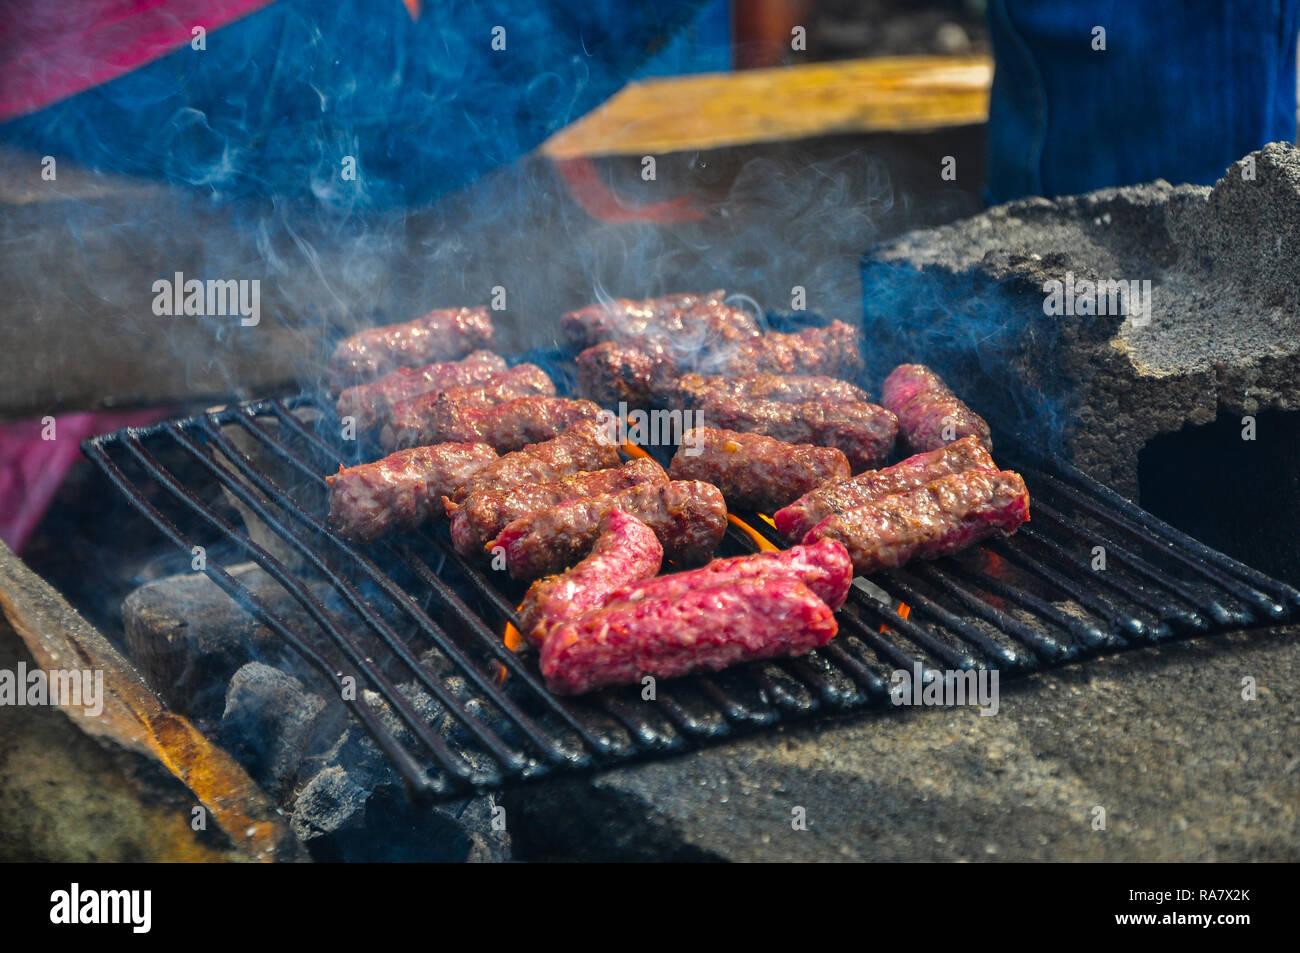 Bbq cevapi rostilj beef Bosnian food cooking on the grill Stock Photo -  Alamy